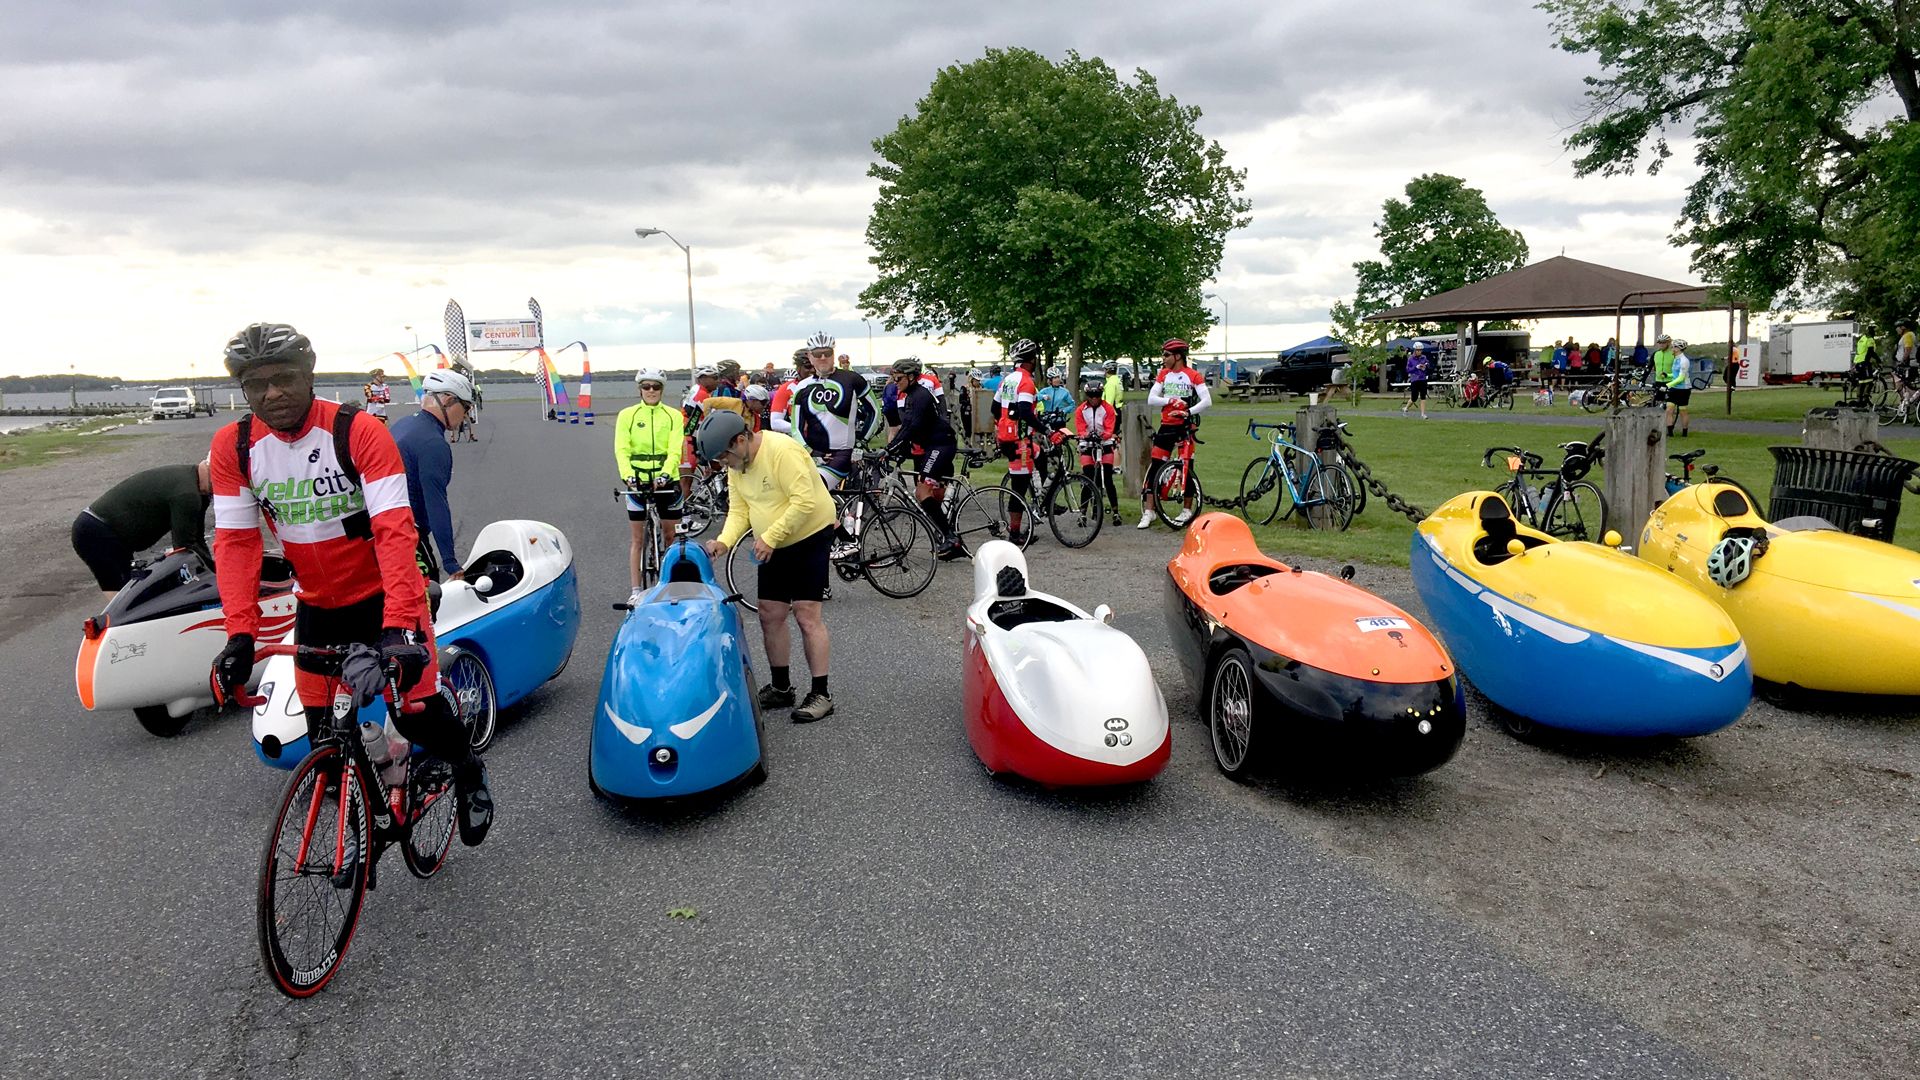 A group of velomobiles, or bicycle cars